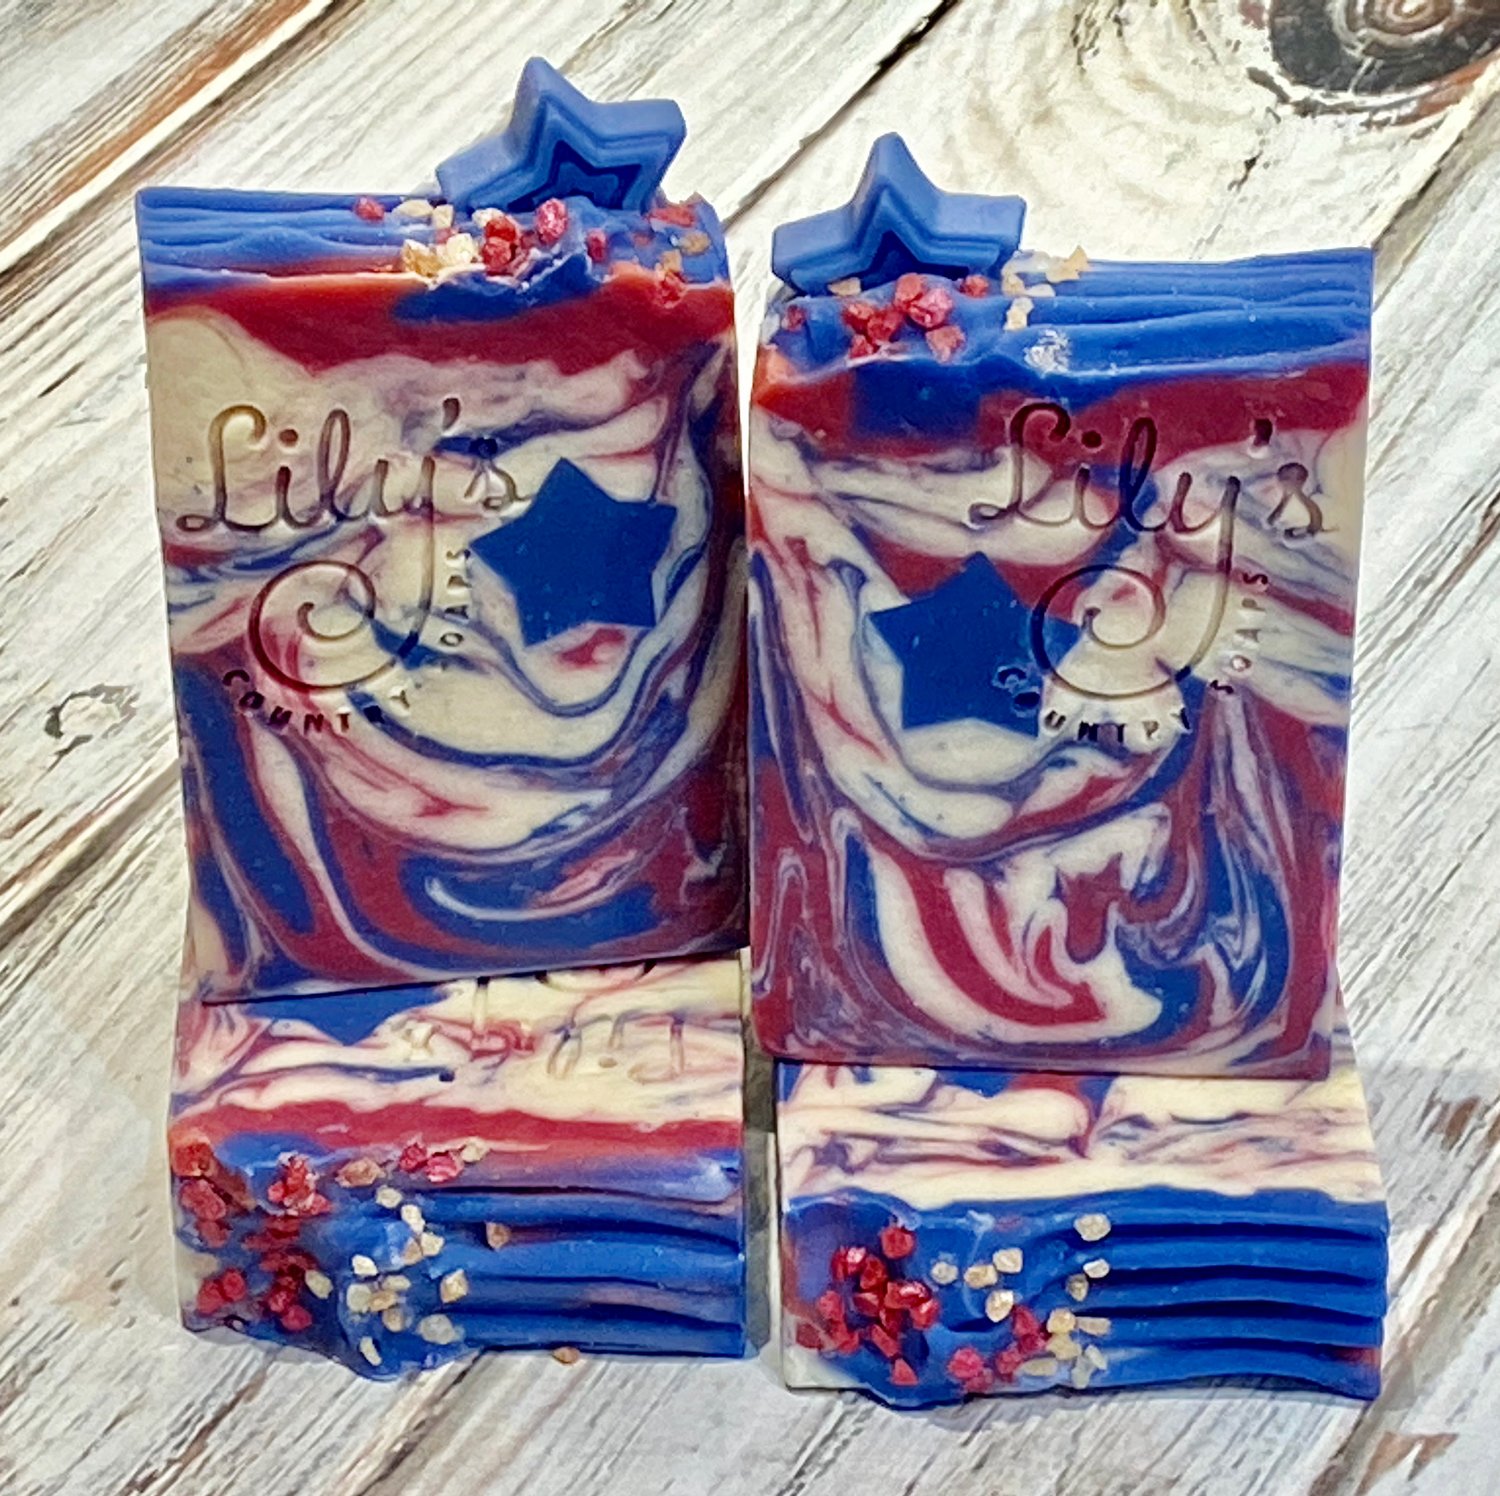 Red, White & Blue Swirl Soap with Natural Colorants